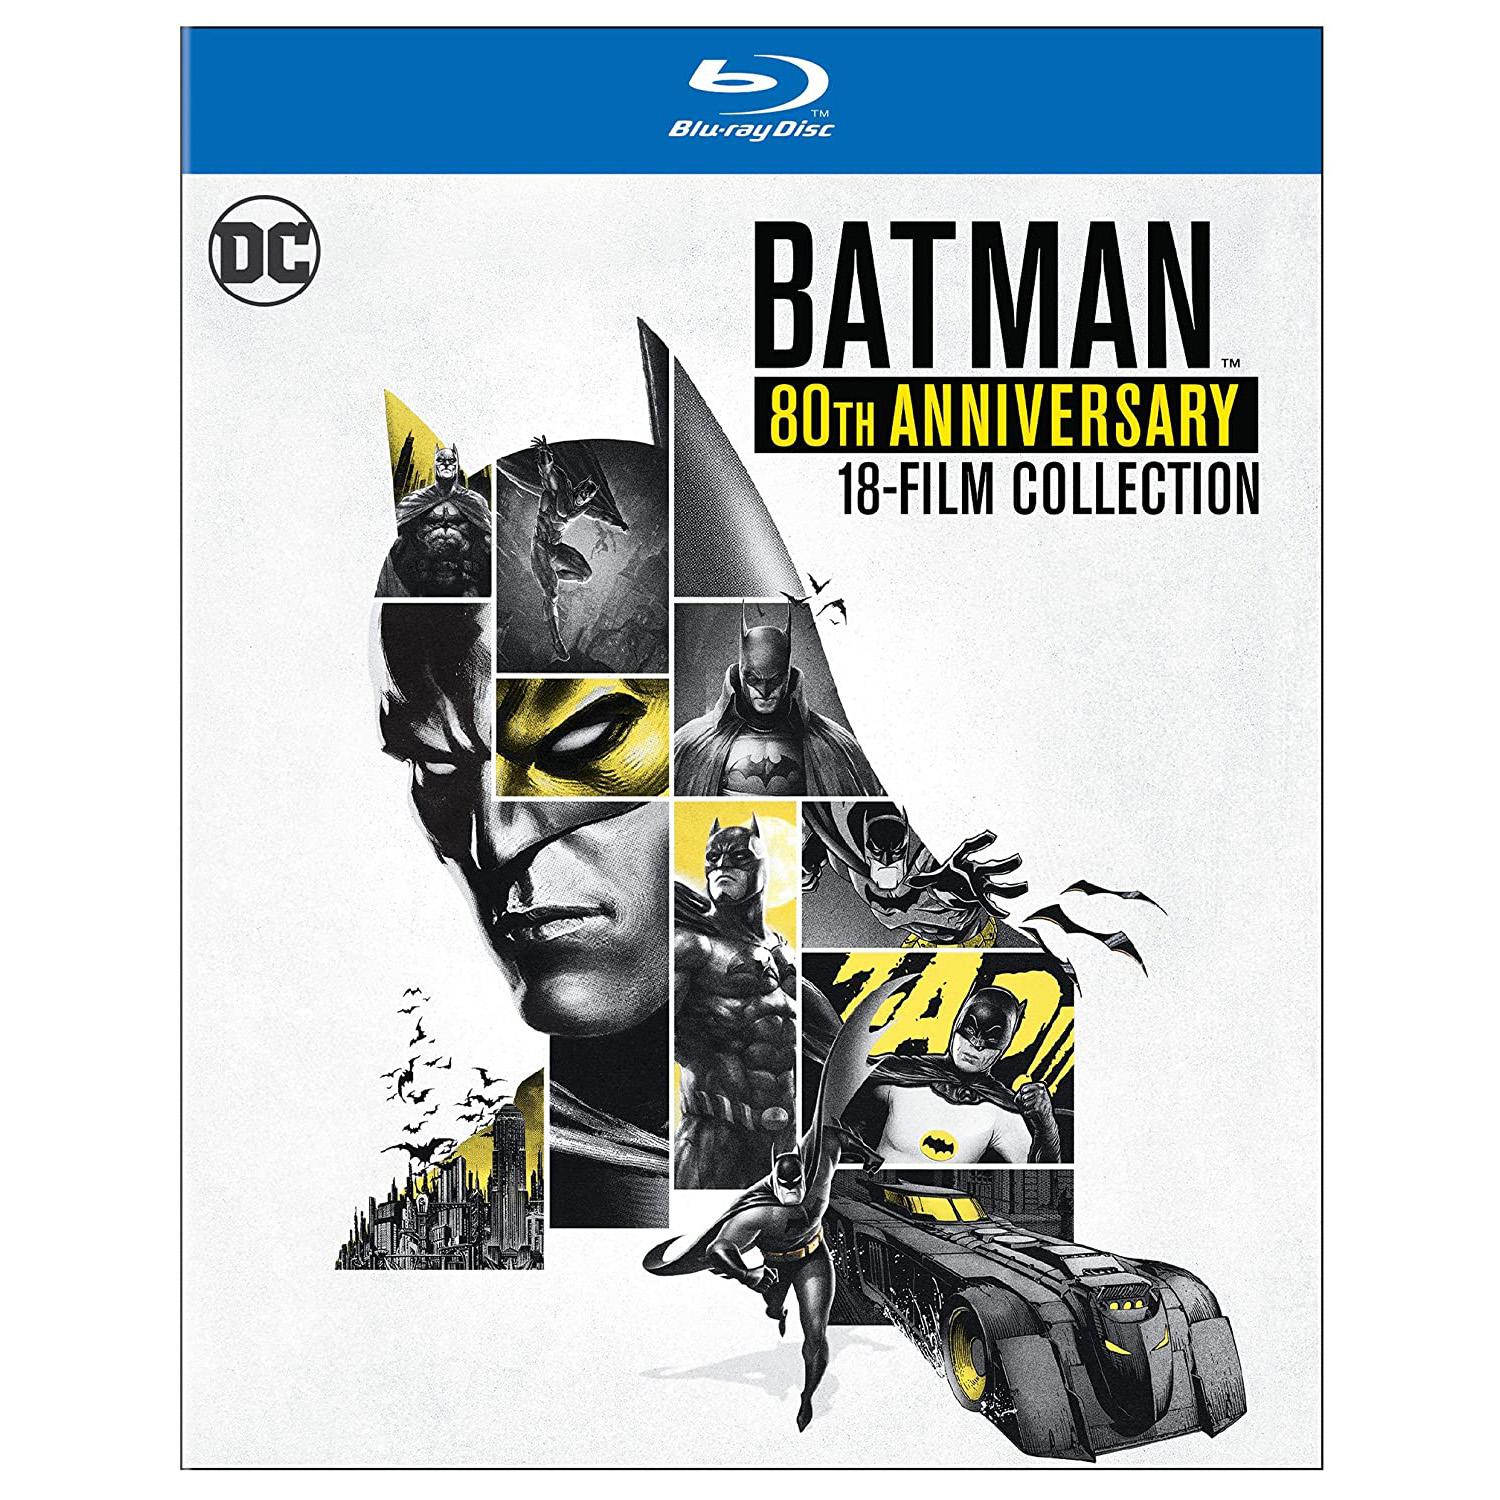 Batman 80th Anniversary Animated 18-Film Collection Blu-ray for $41.99 Shipped